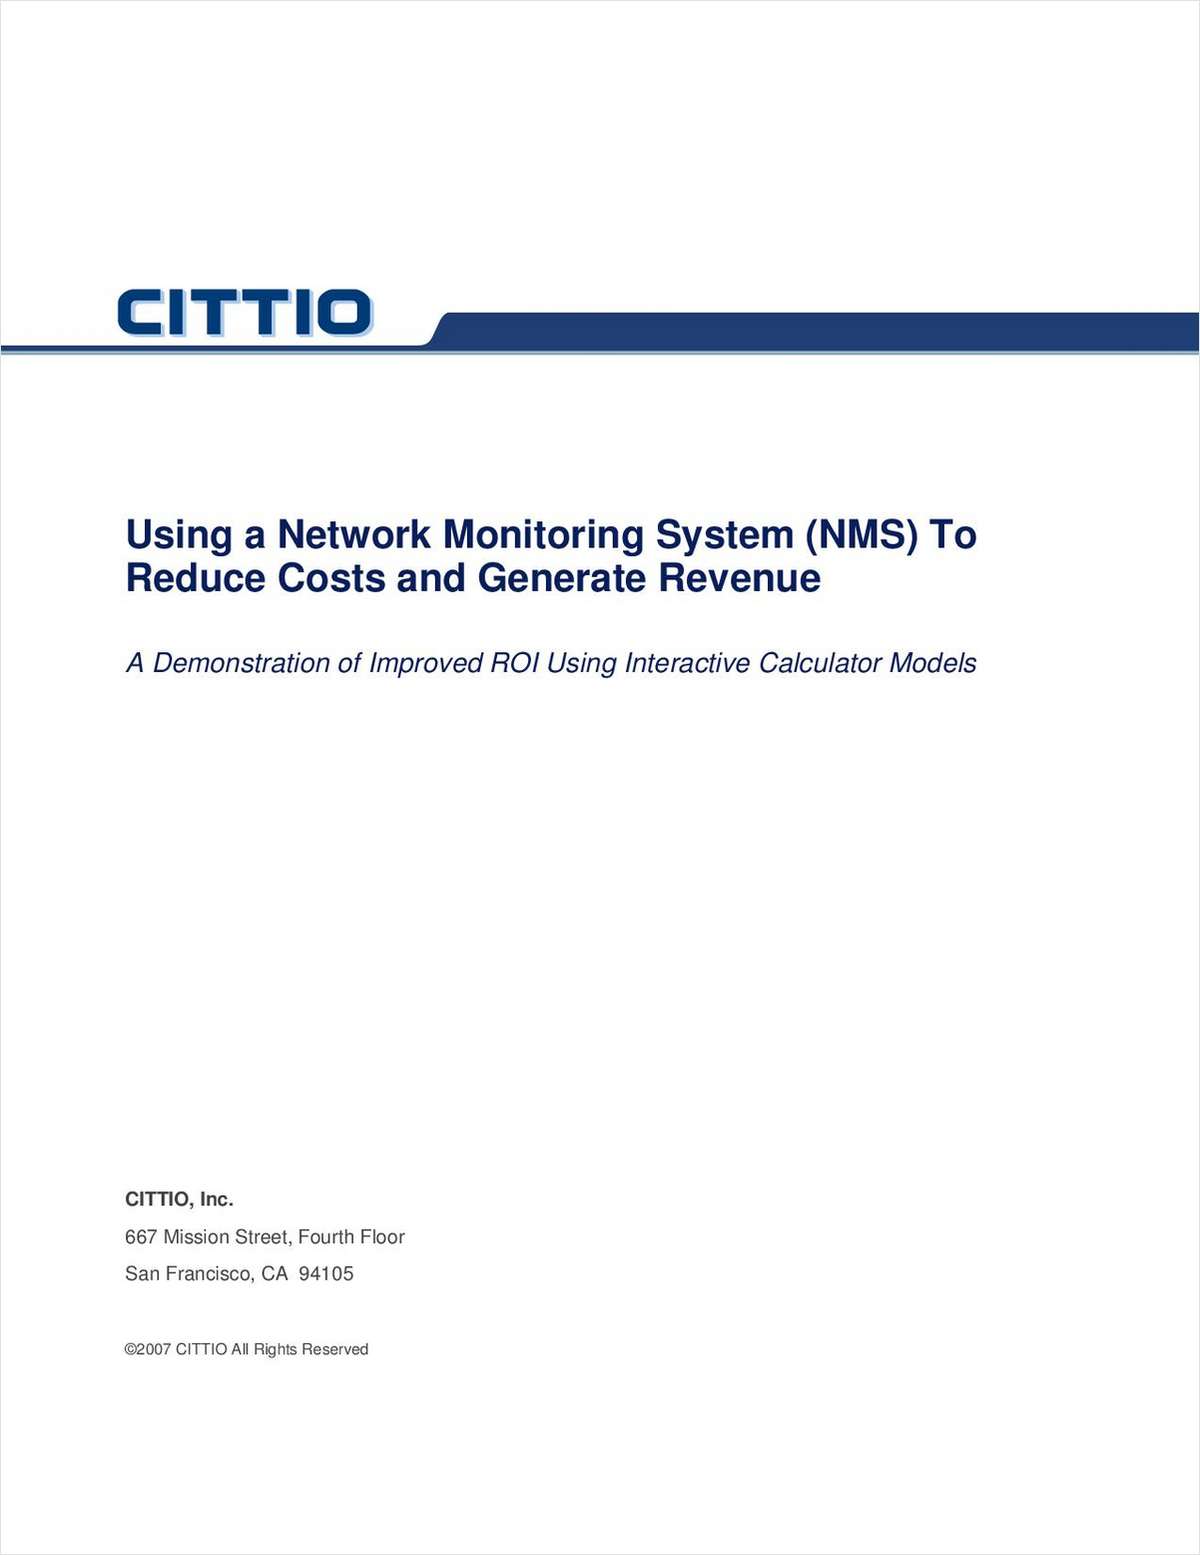 Using a Network Monitoring System (NMS) To Reduce Costs and Generate Revenue